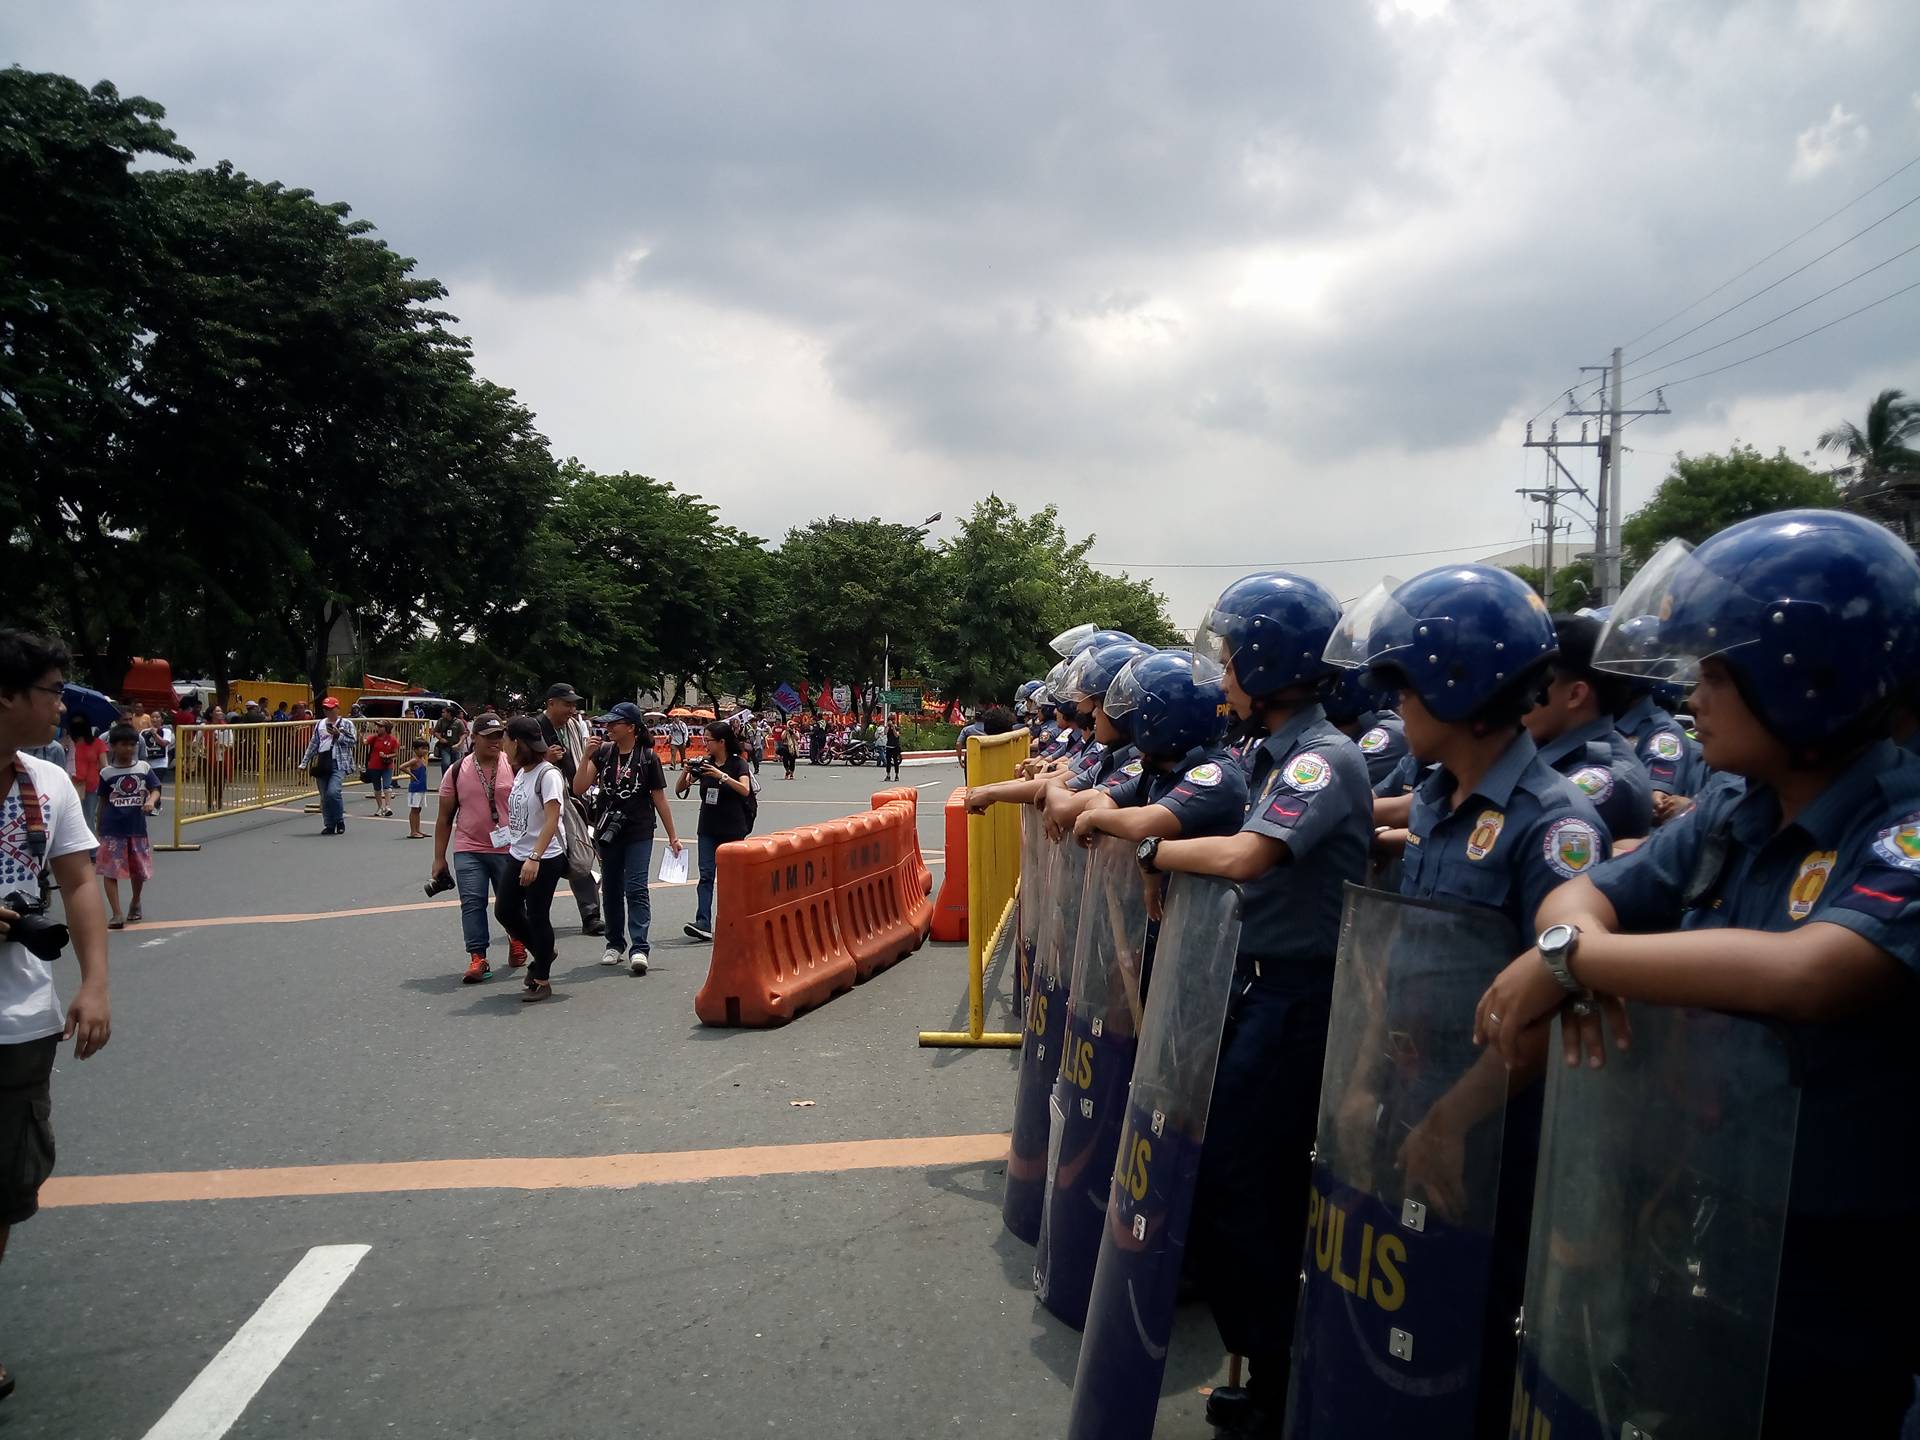 NO MORE TENSION. With only a few barricades, there was generally no tension between rallyists and police forces during President Rodrigo Duterte's first State of the Nation Address in Manila on Monday, July 25. (Earl O. Condeza/davaotoday.com)